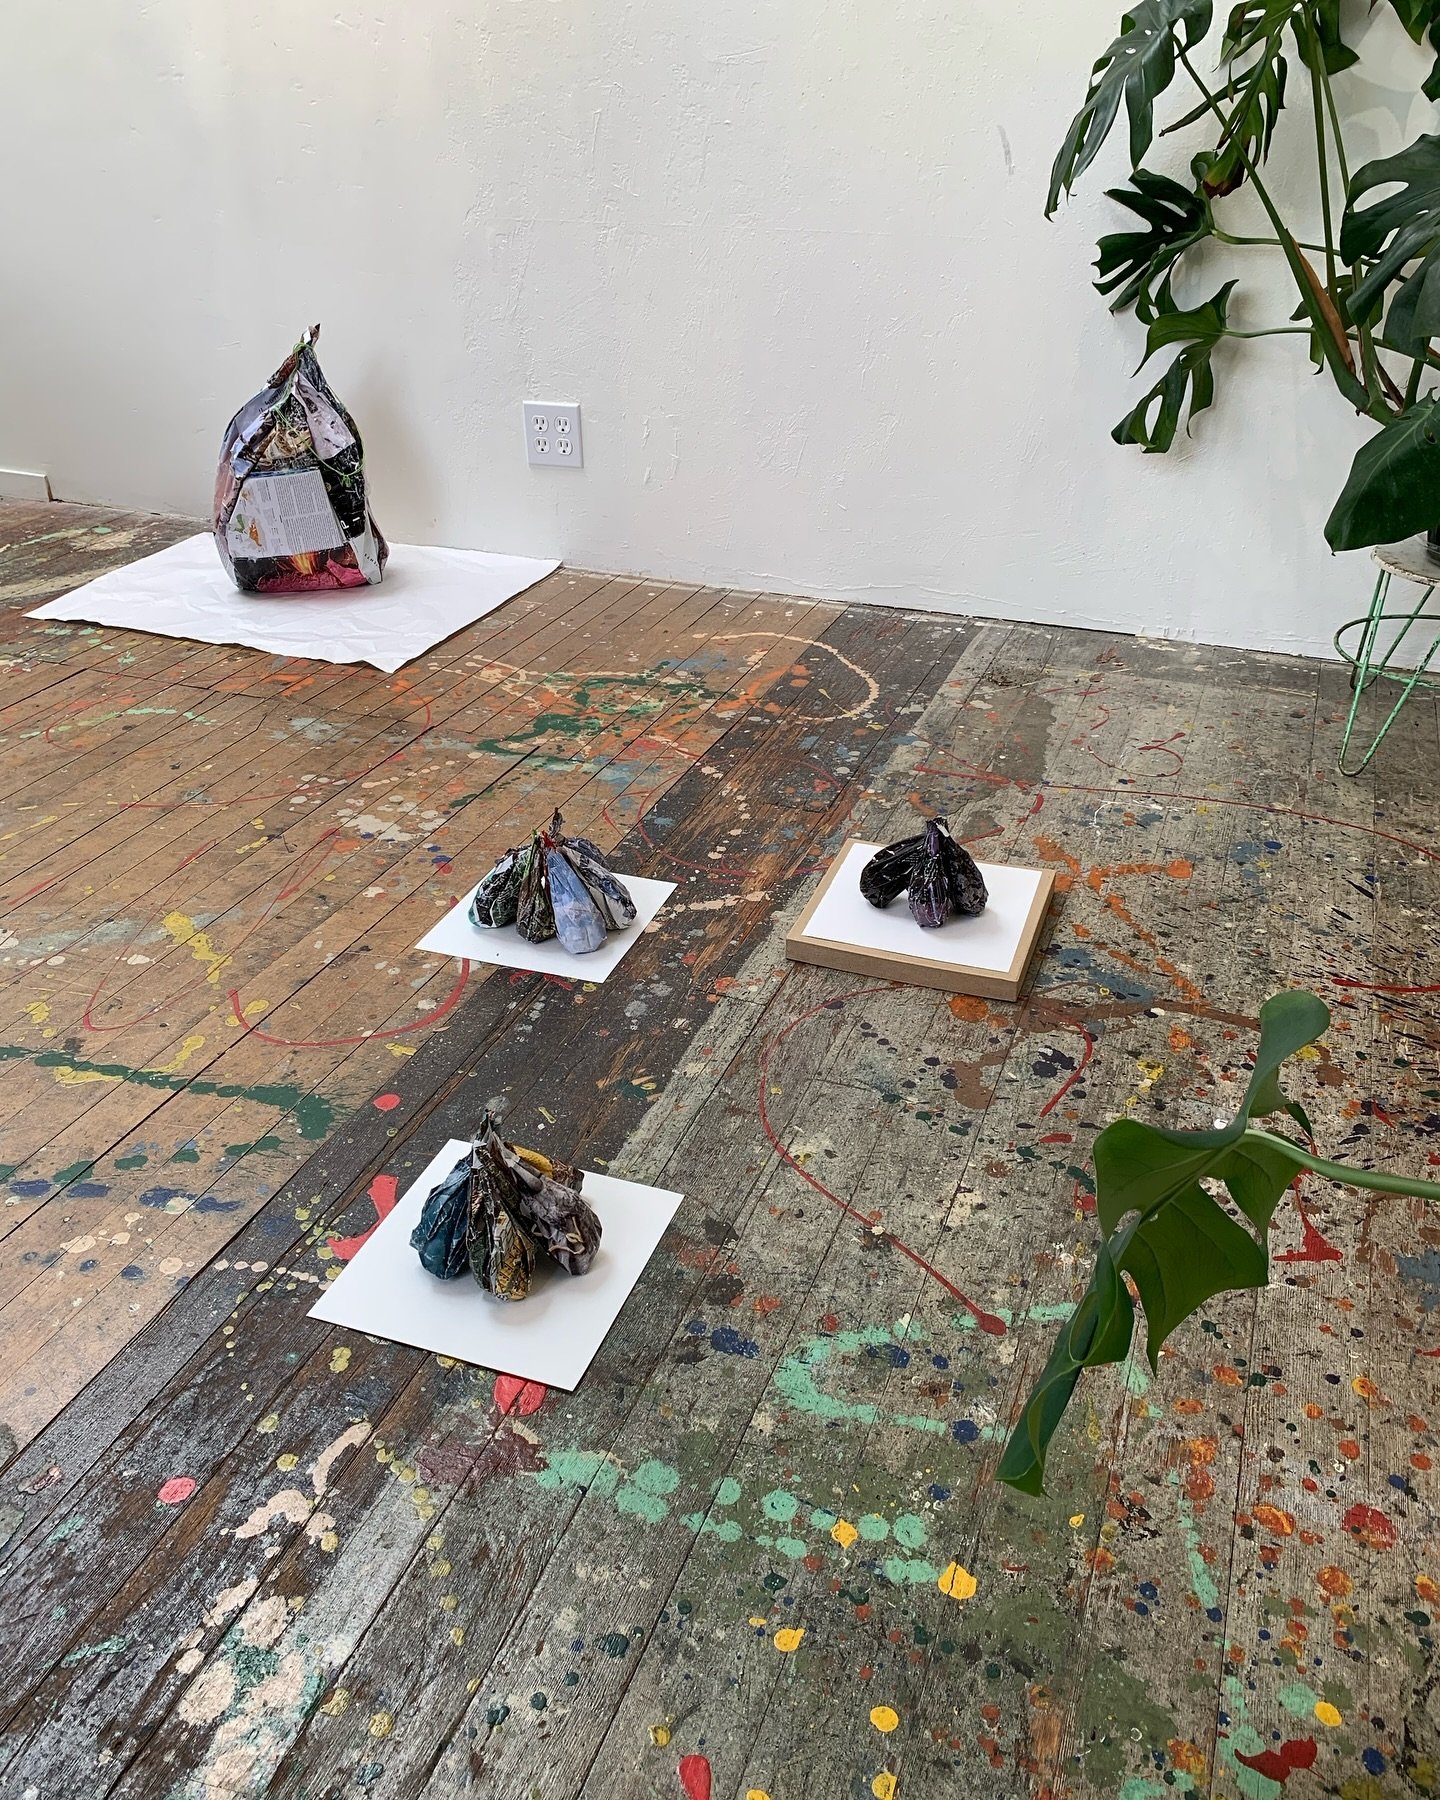 Head over to Arthouse Saturday 5/11 between 5-8 pm to take a look at the new exhibition that&rsquo;s up in the main gallery. It&rsquo;s a show by artist, Joanna Crawshaw who is a lovely human and makes great work! 

Kate&rsquo;s Studio at Arthouse @a